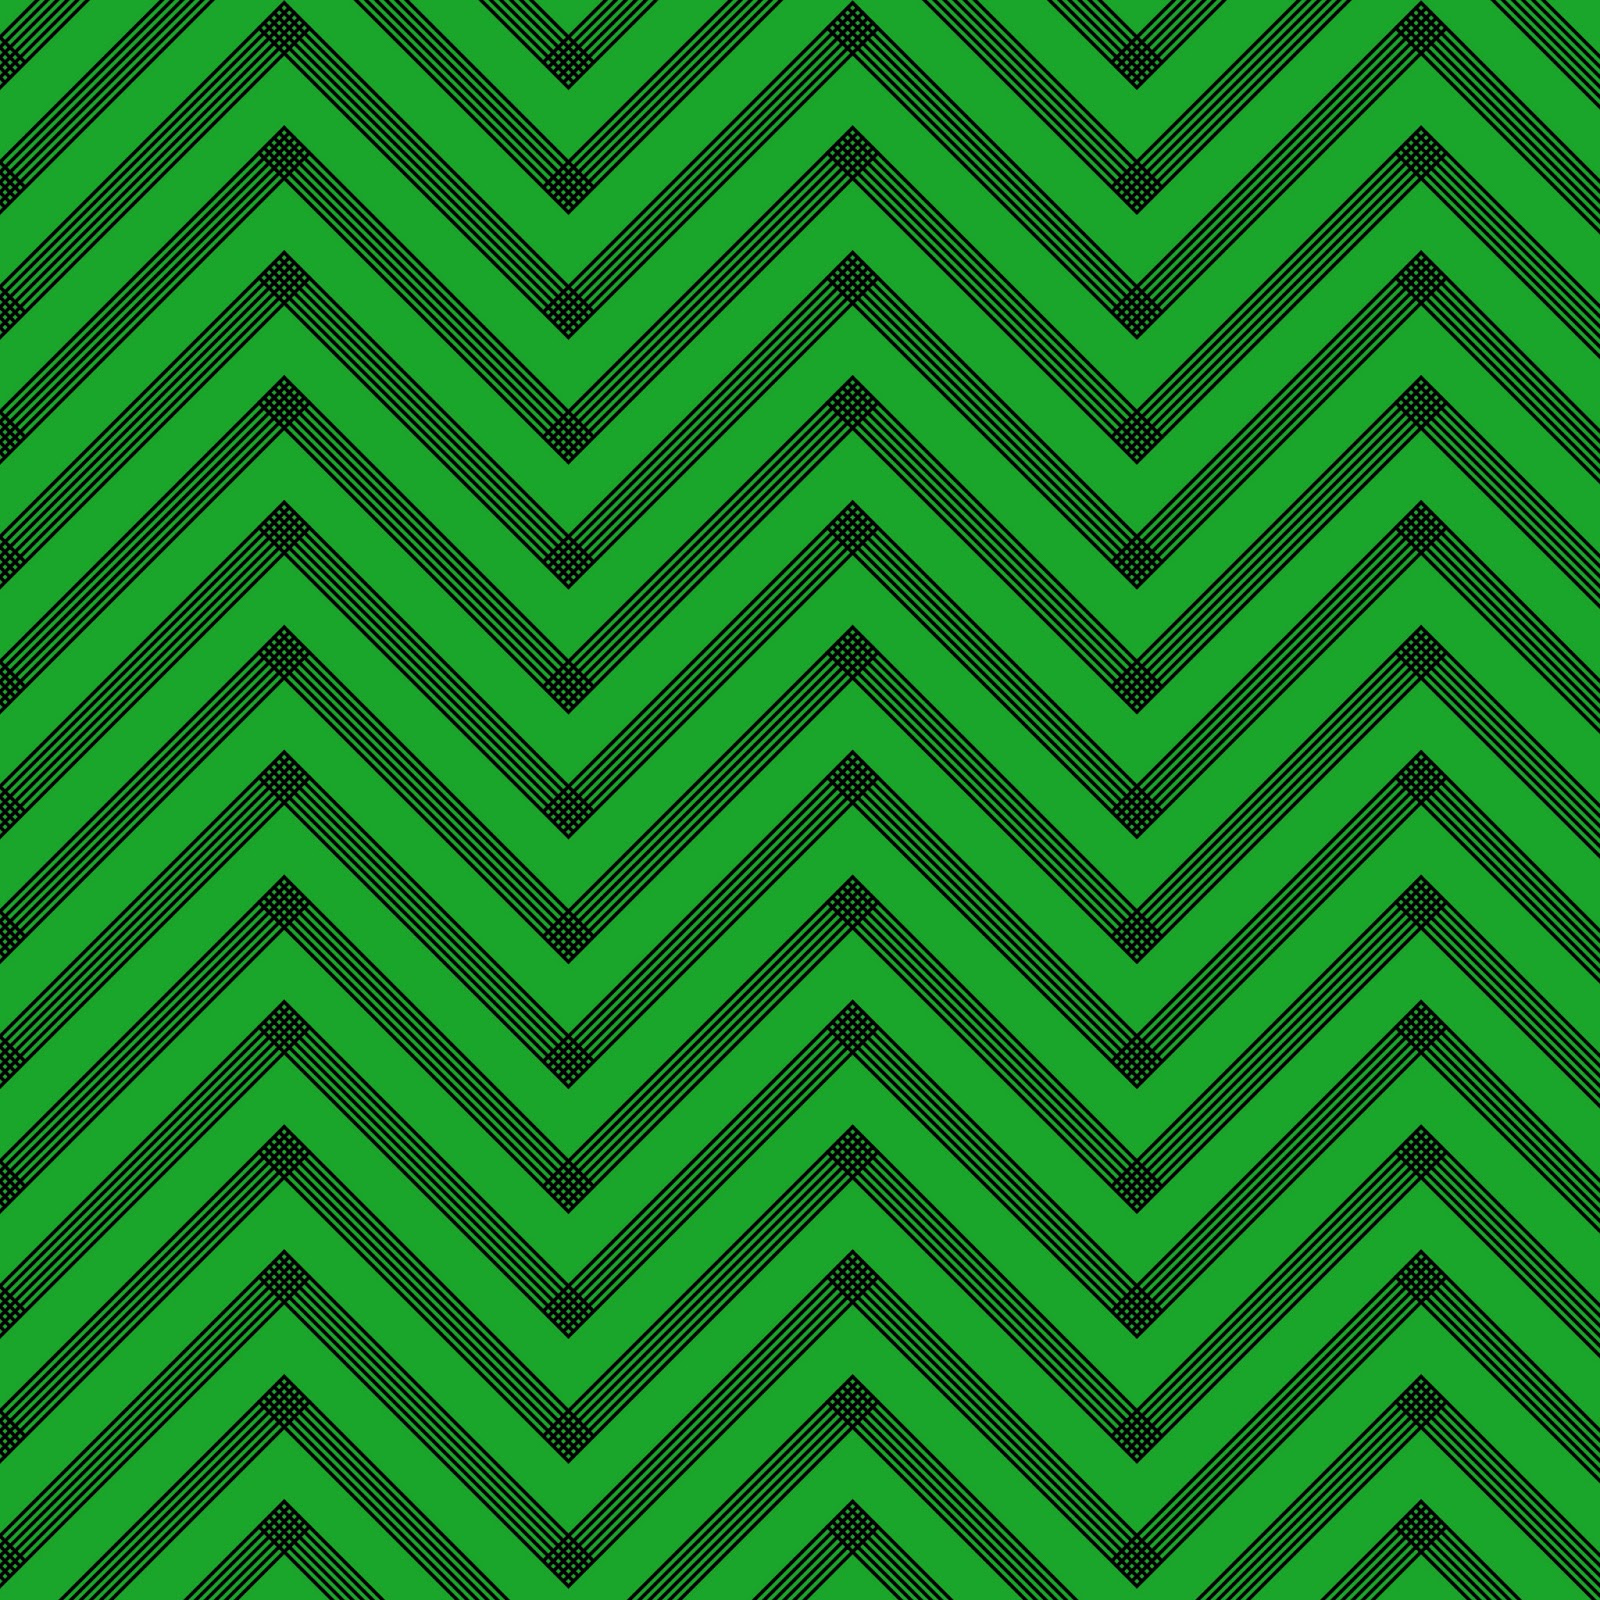 Chevron Backgrounds Navy And Green Chevron Background